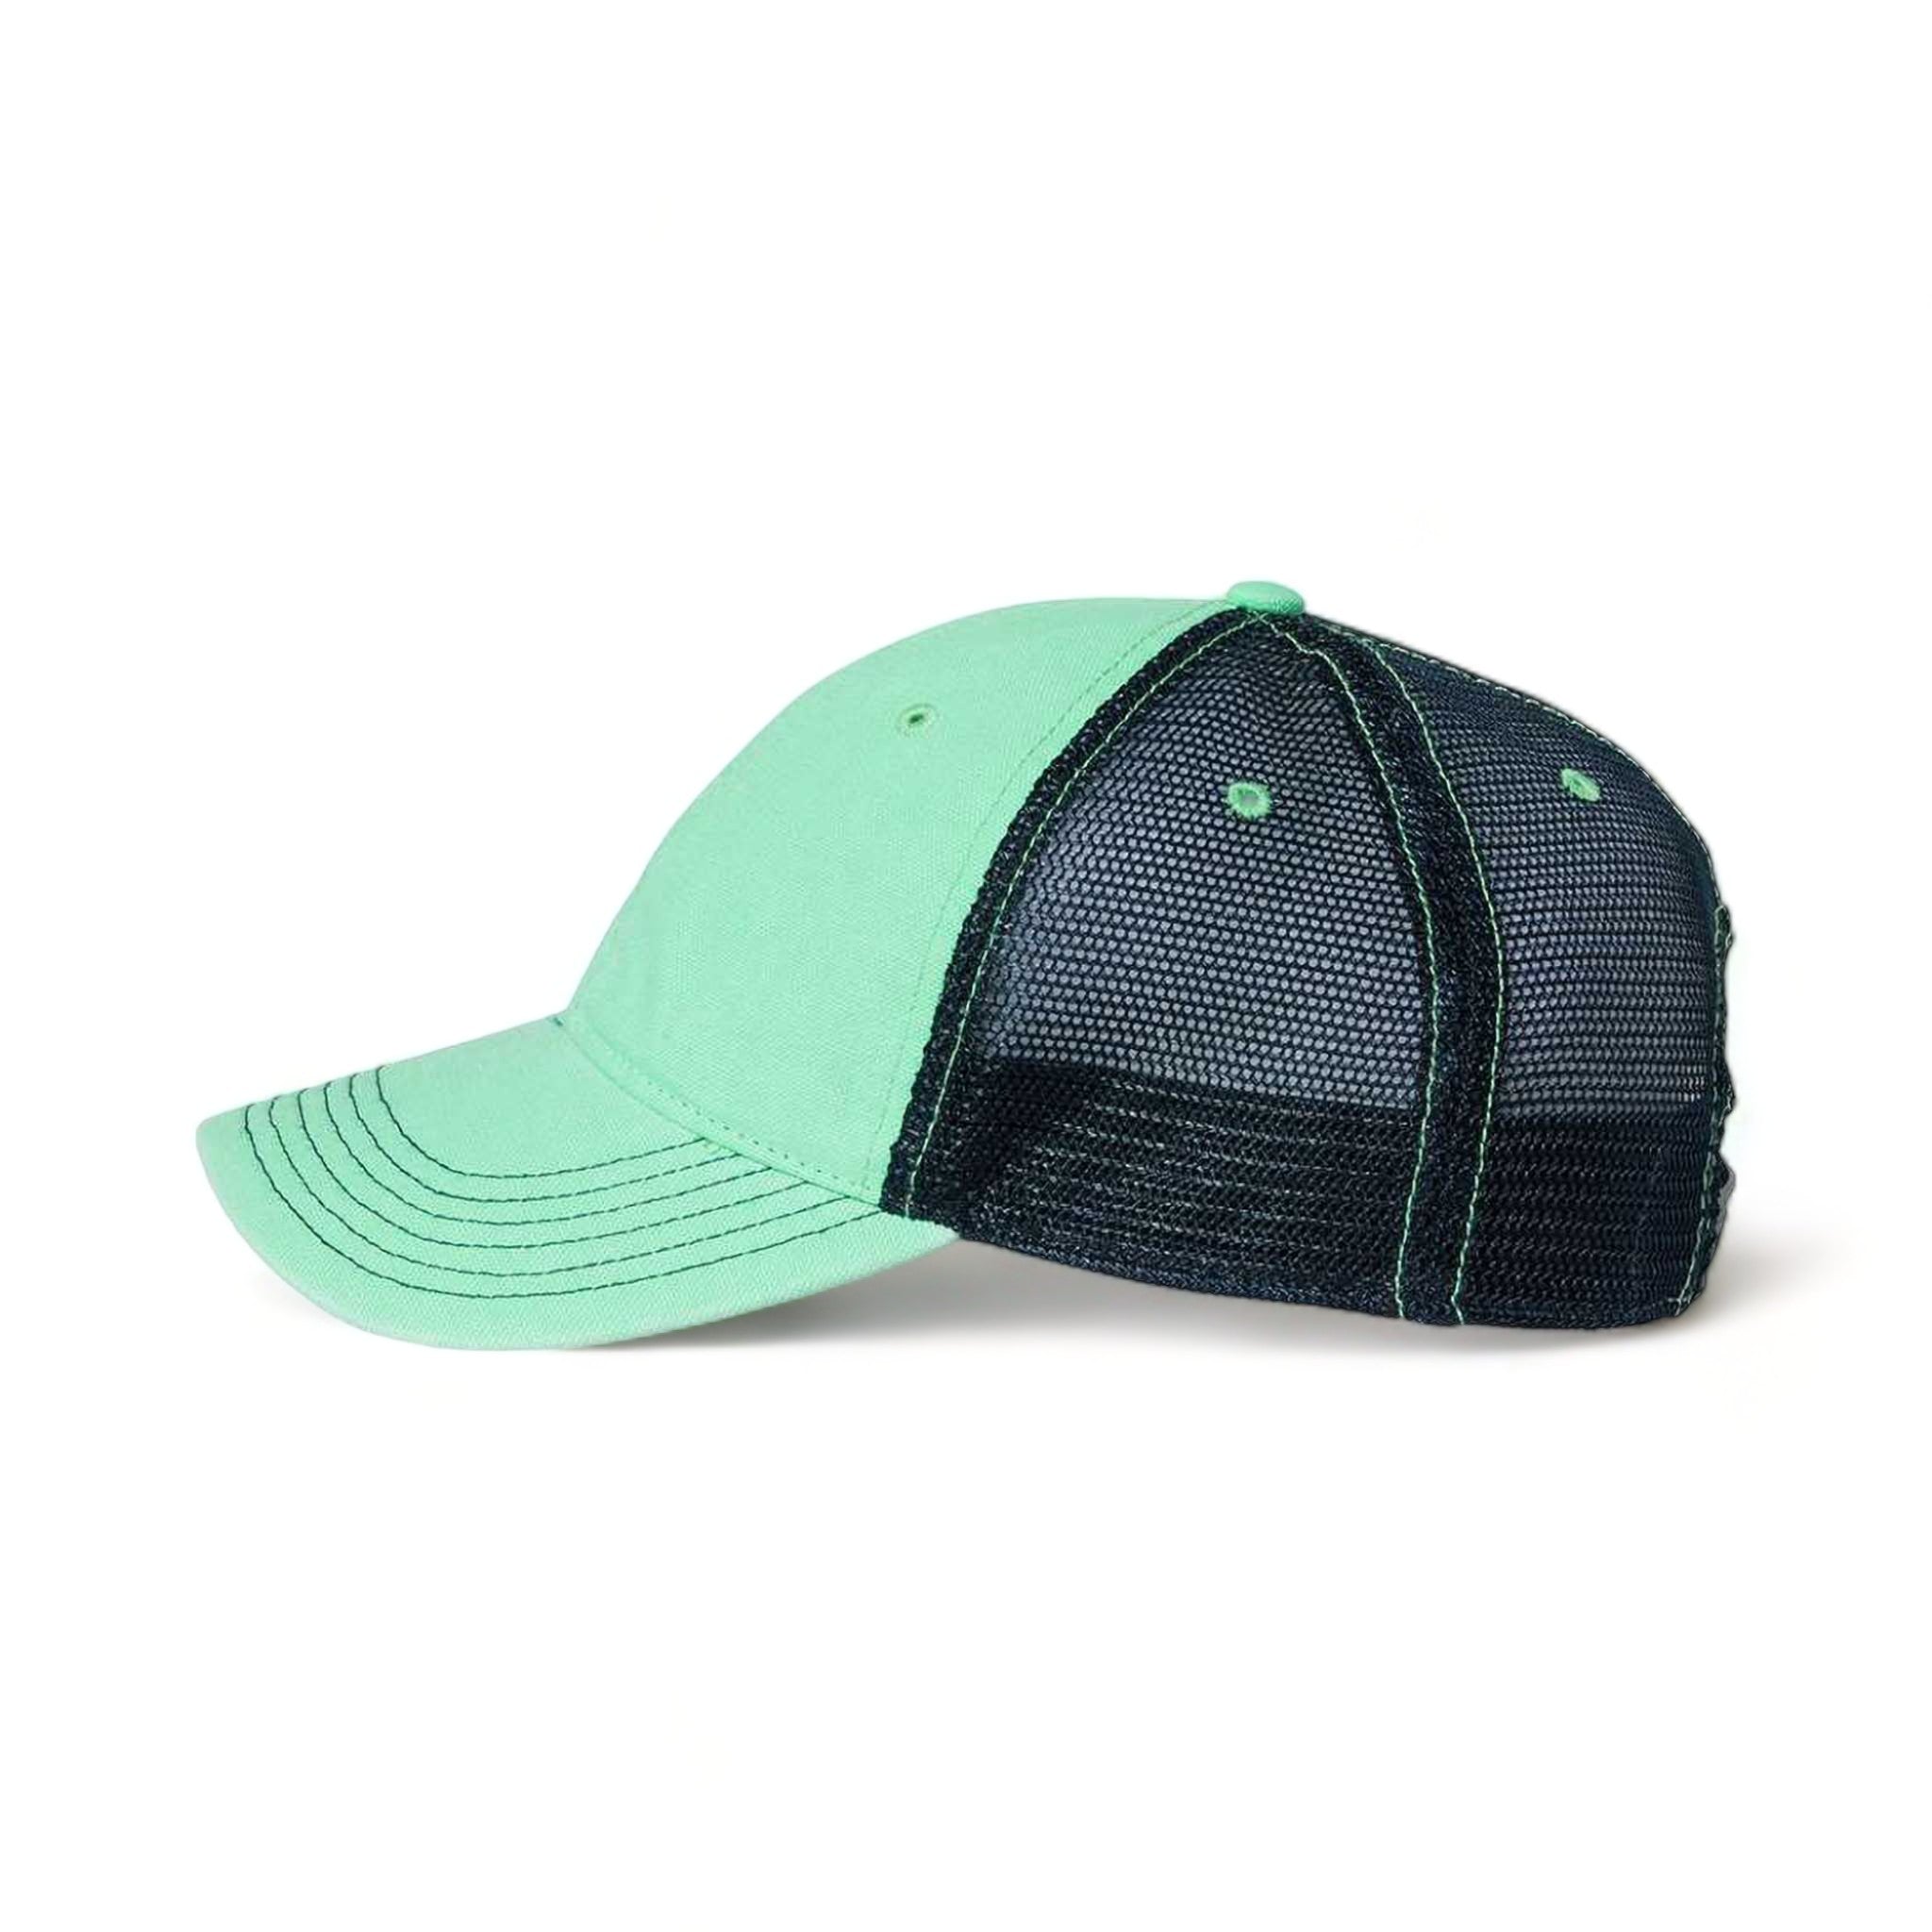 Side view of LEGACY DTA custom hat in spearmint and navy